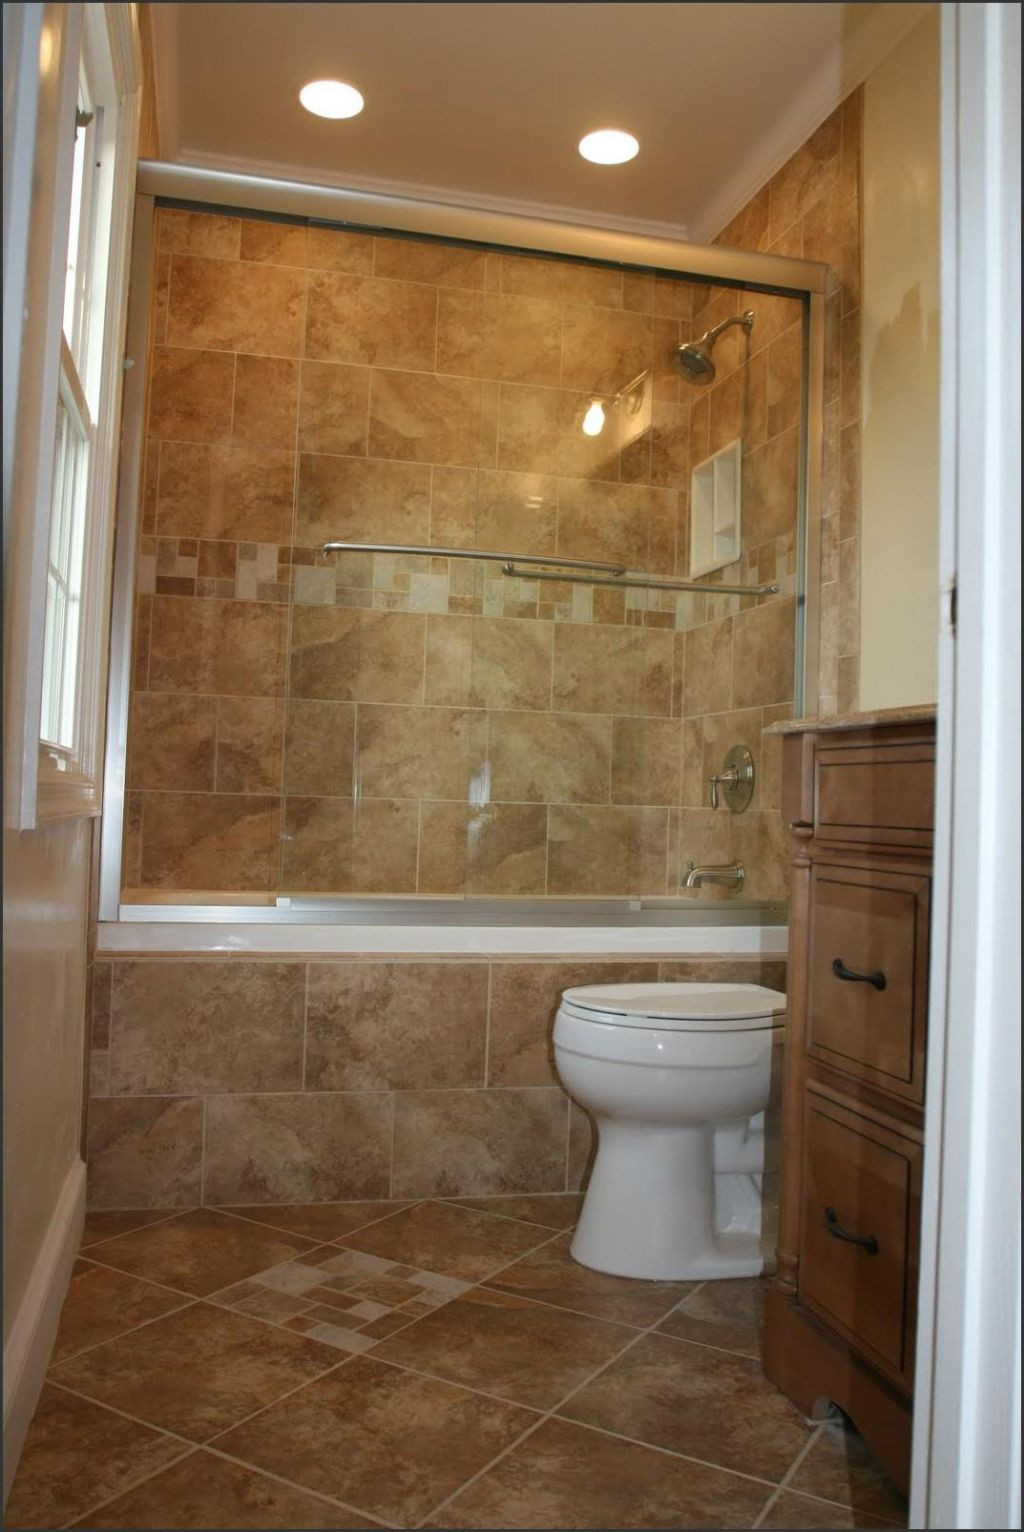 Bathroom And Shower Tile Ideas
 Tile Shower Ideas Affecting the Appearance of the Space